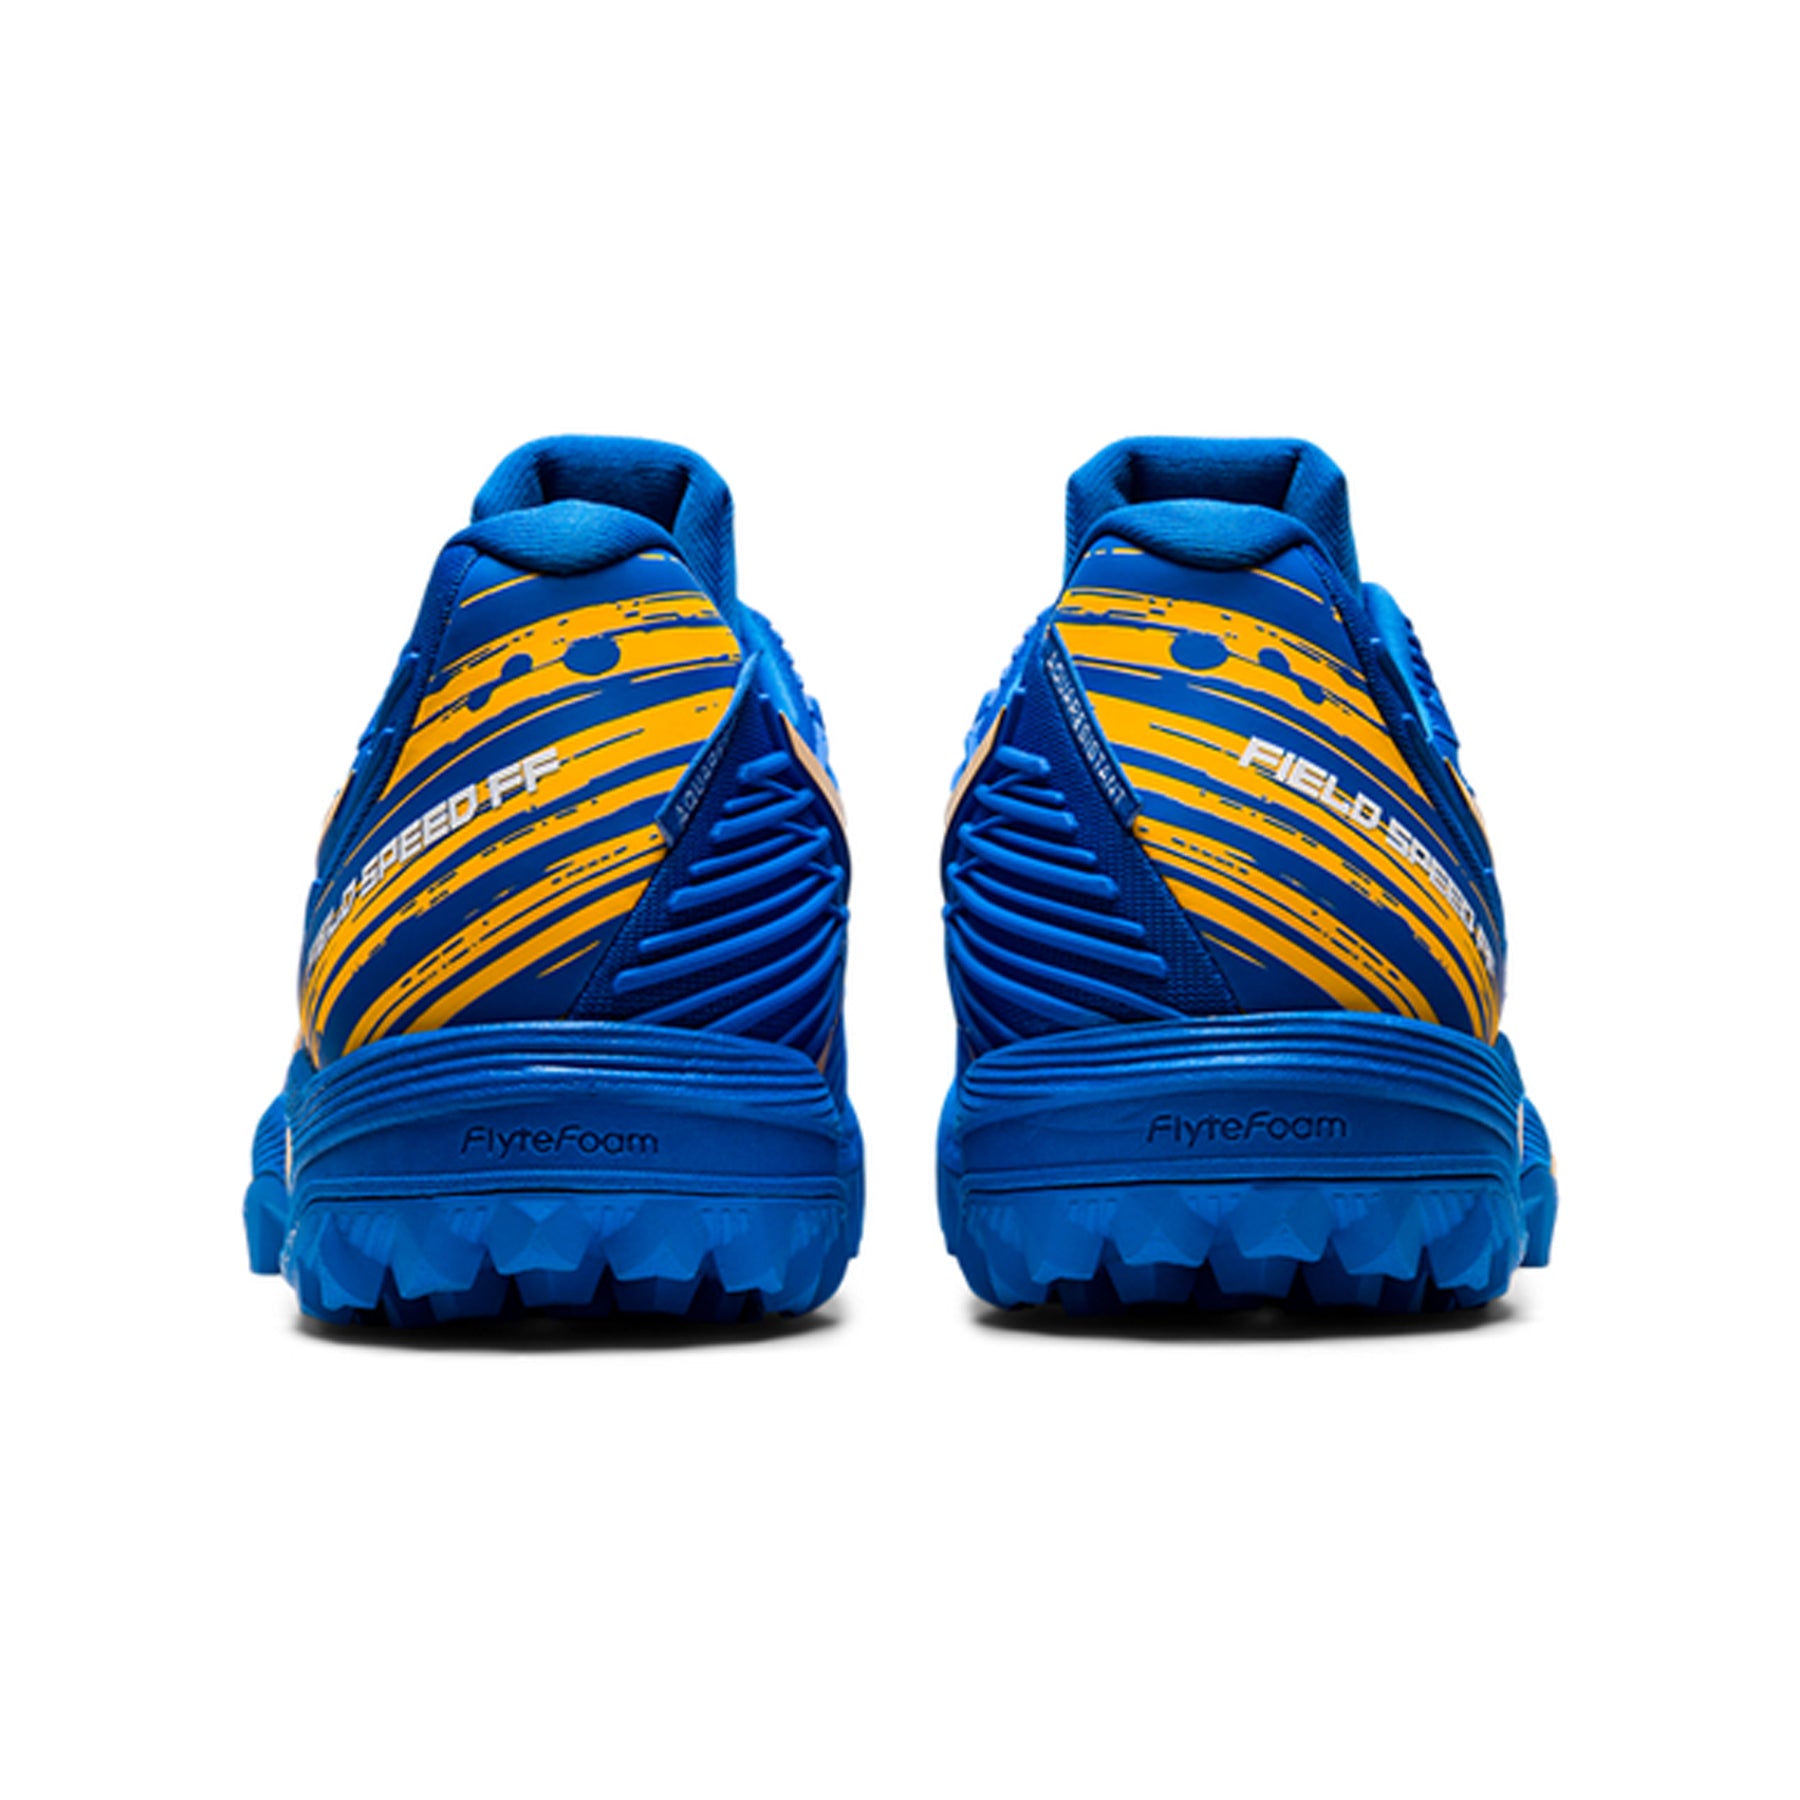 Asics Field Speed FF Hockey Shoes: Electric Blue/Sunflower